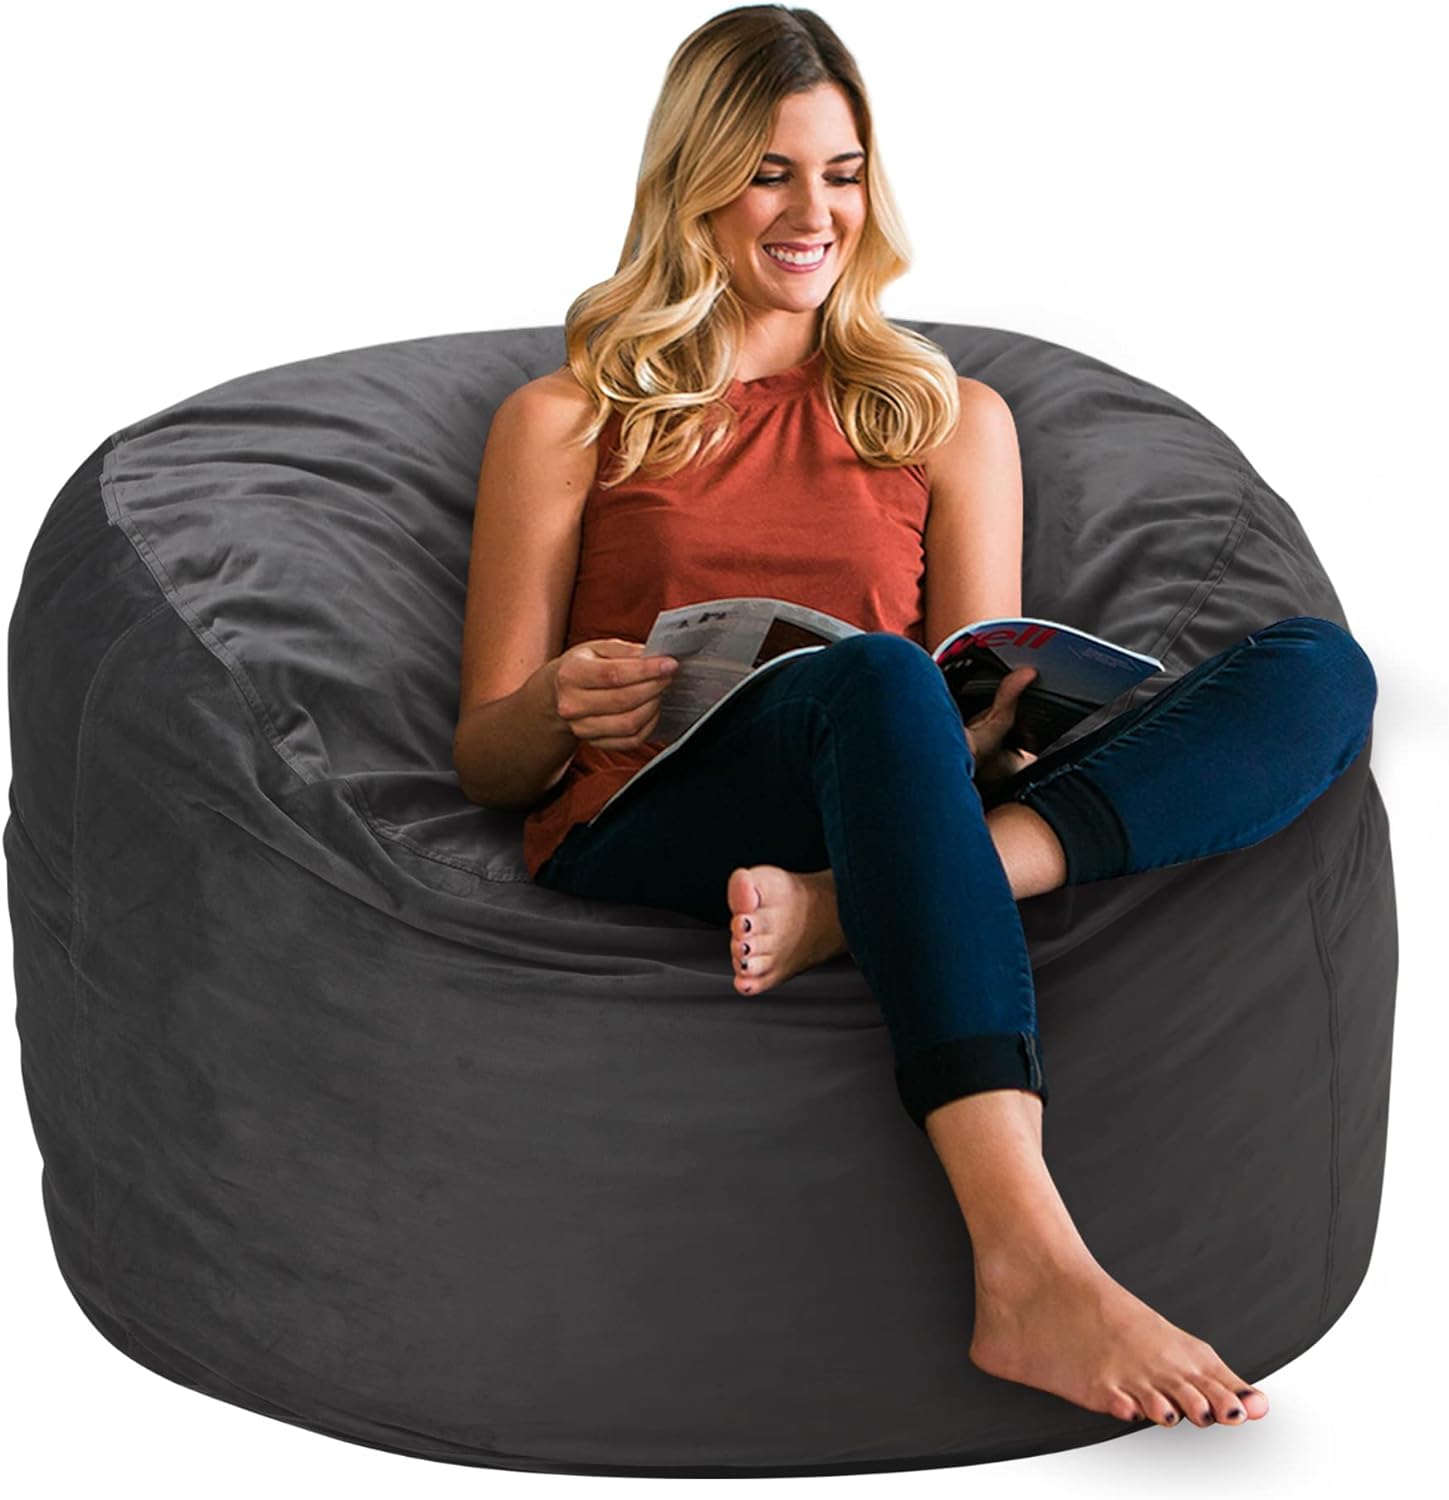 HABUTWAY Bean Bag Chair 3Ft Luxurious Velvet Ultra Soft Fur with High-Rebound Memory Foam for Adults Plush Lazy Sofa with Fluffy Removable Sponge 3'(Grey)